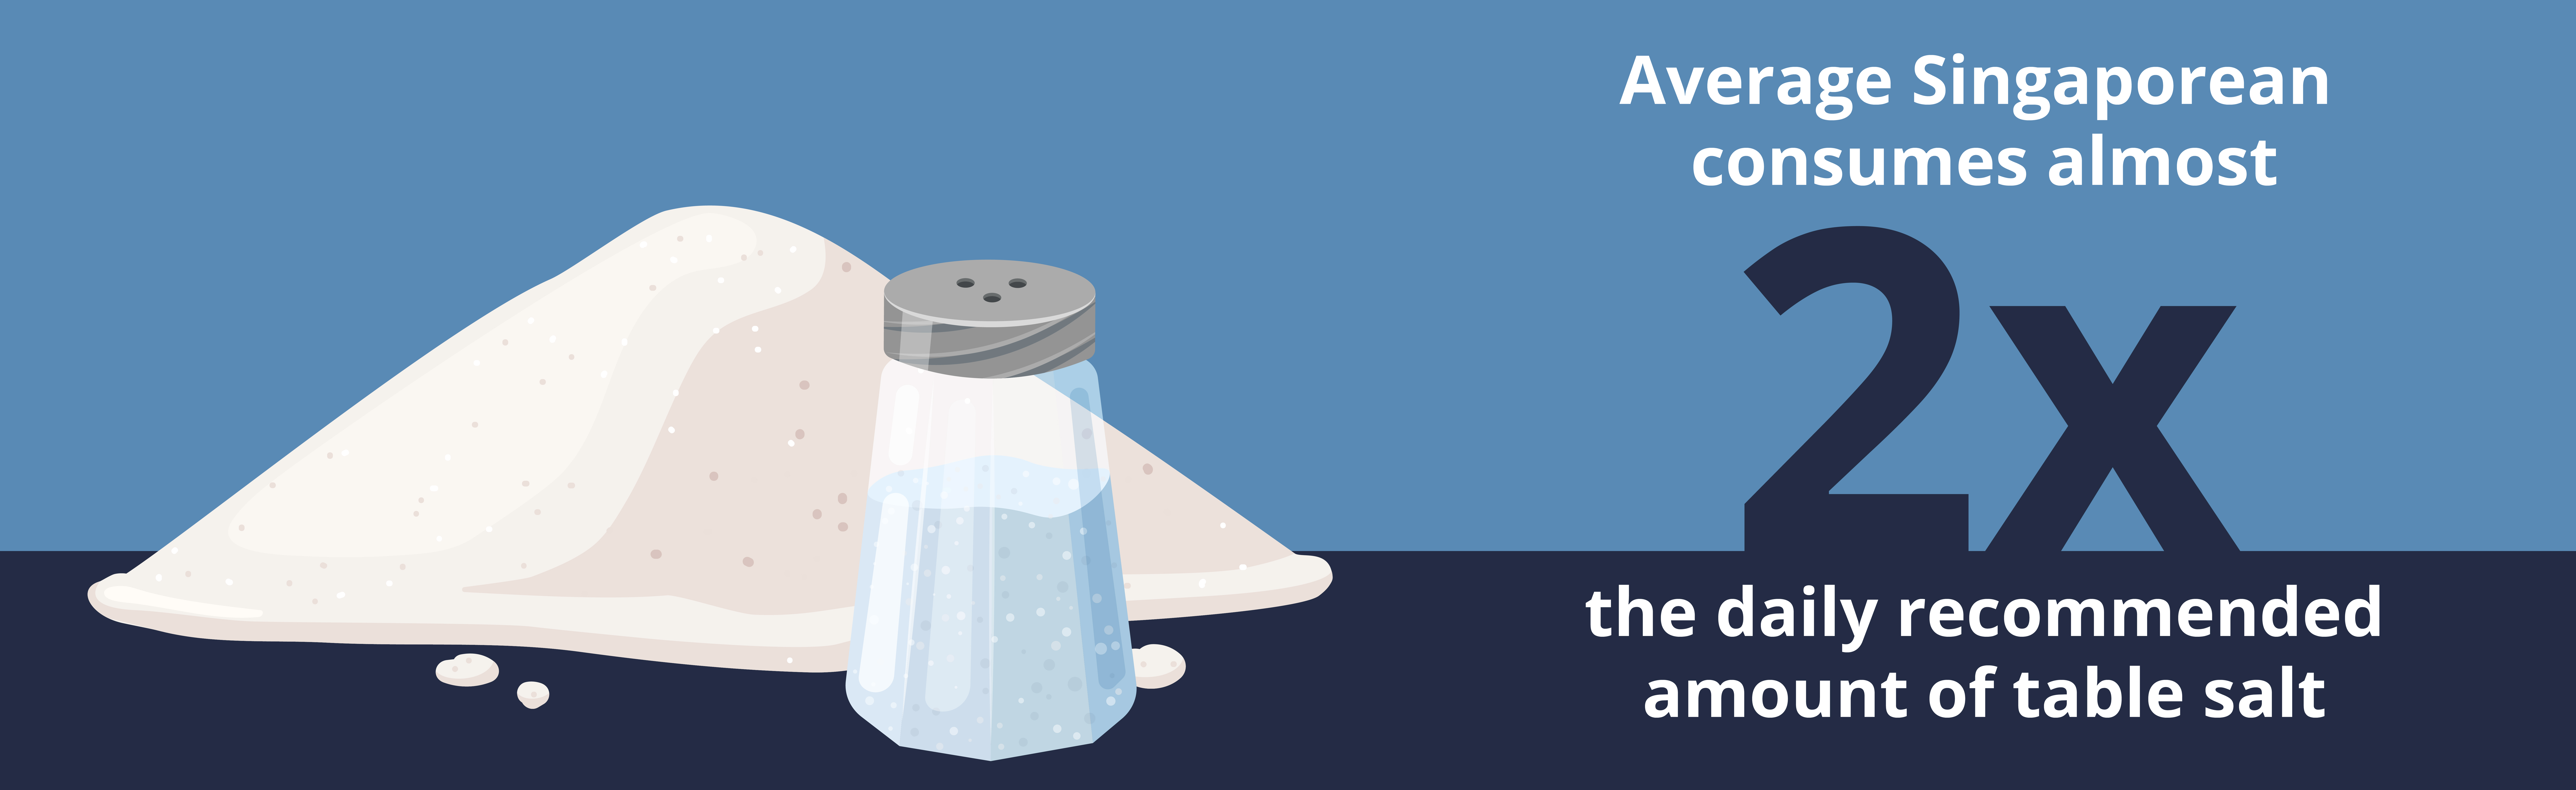 The average Singaporean consumed almost 2 times the daily recommended limit of salt